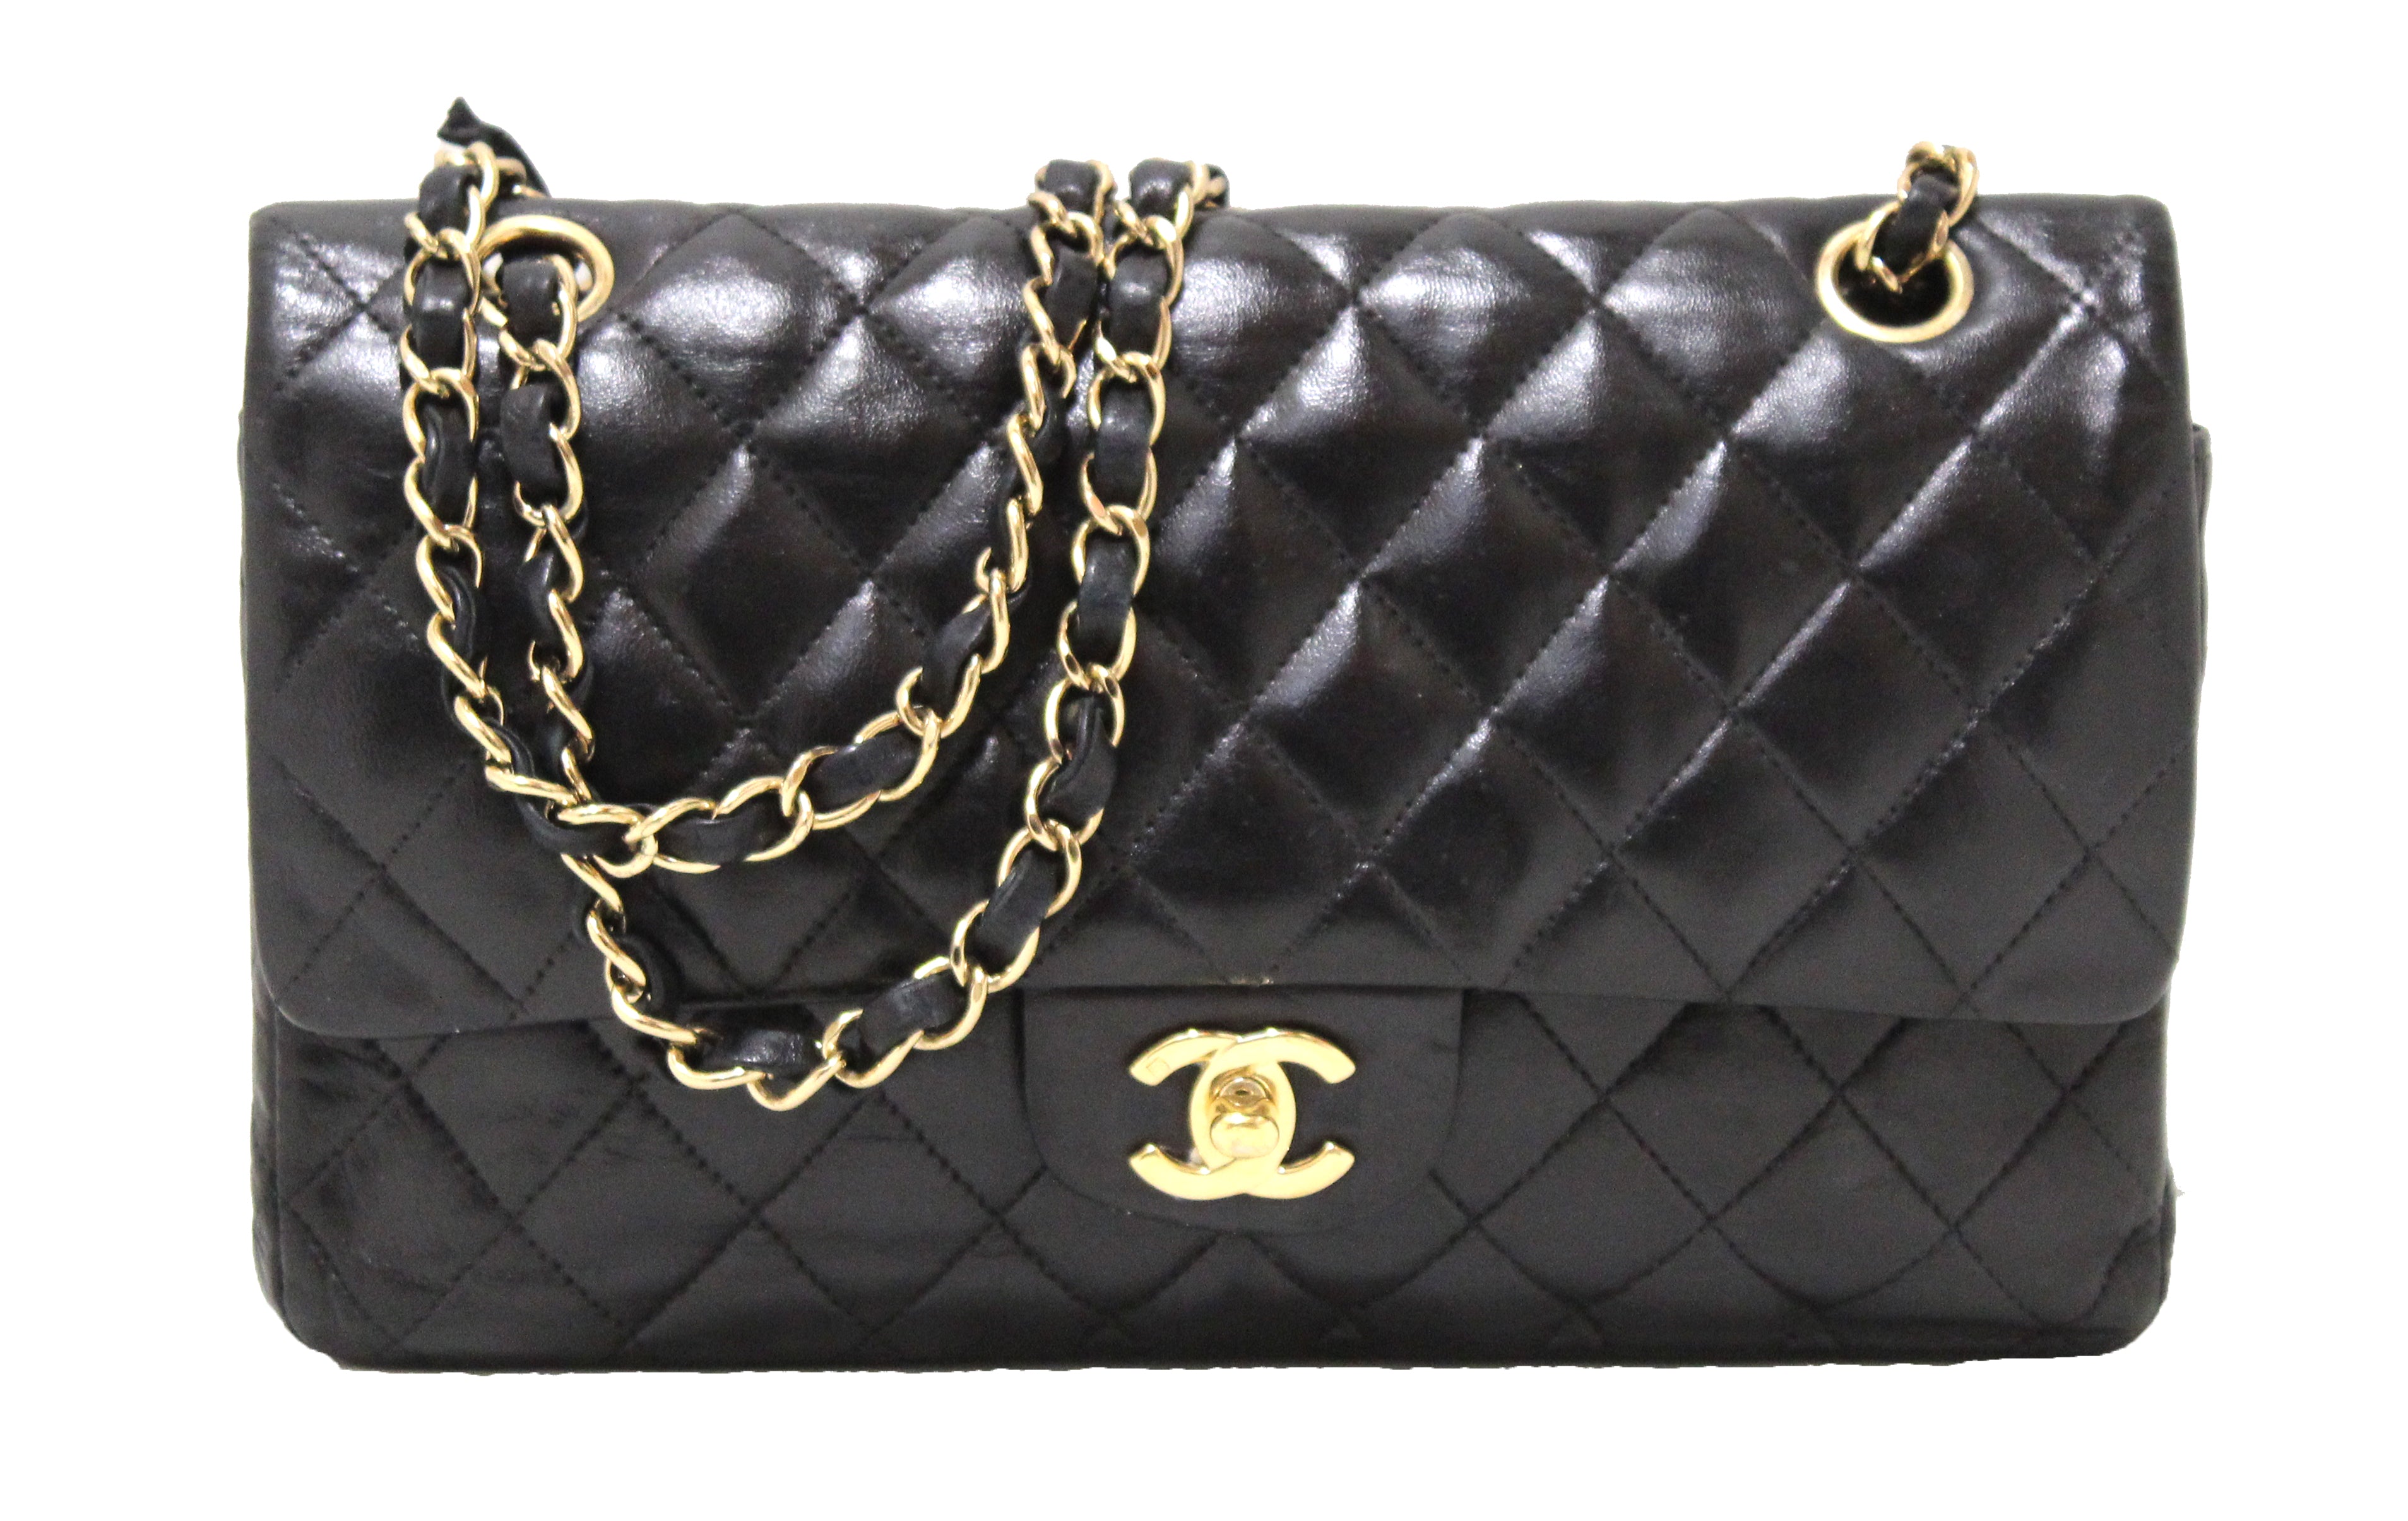 sivim quilted handbags for women chanel like